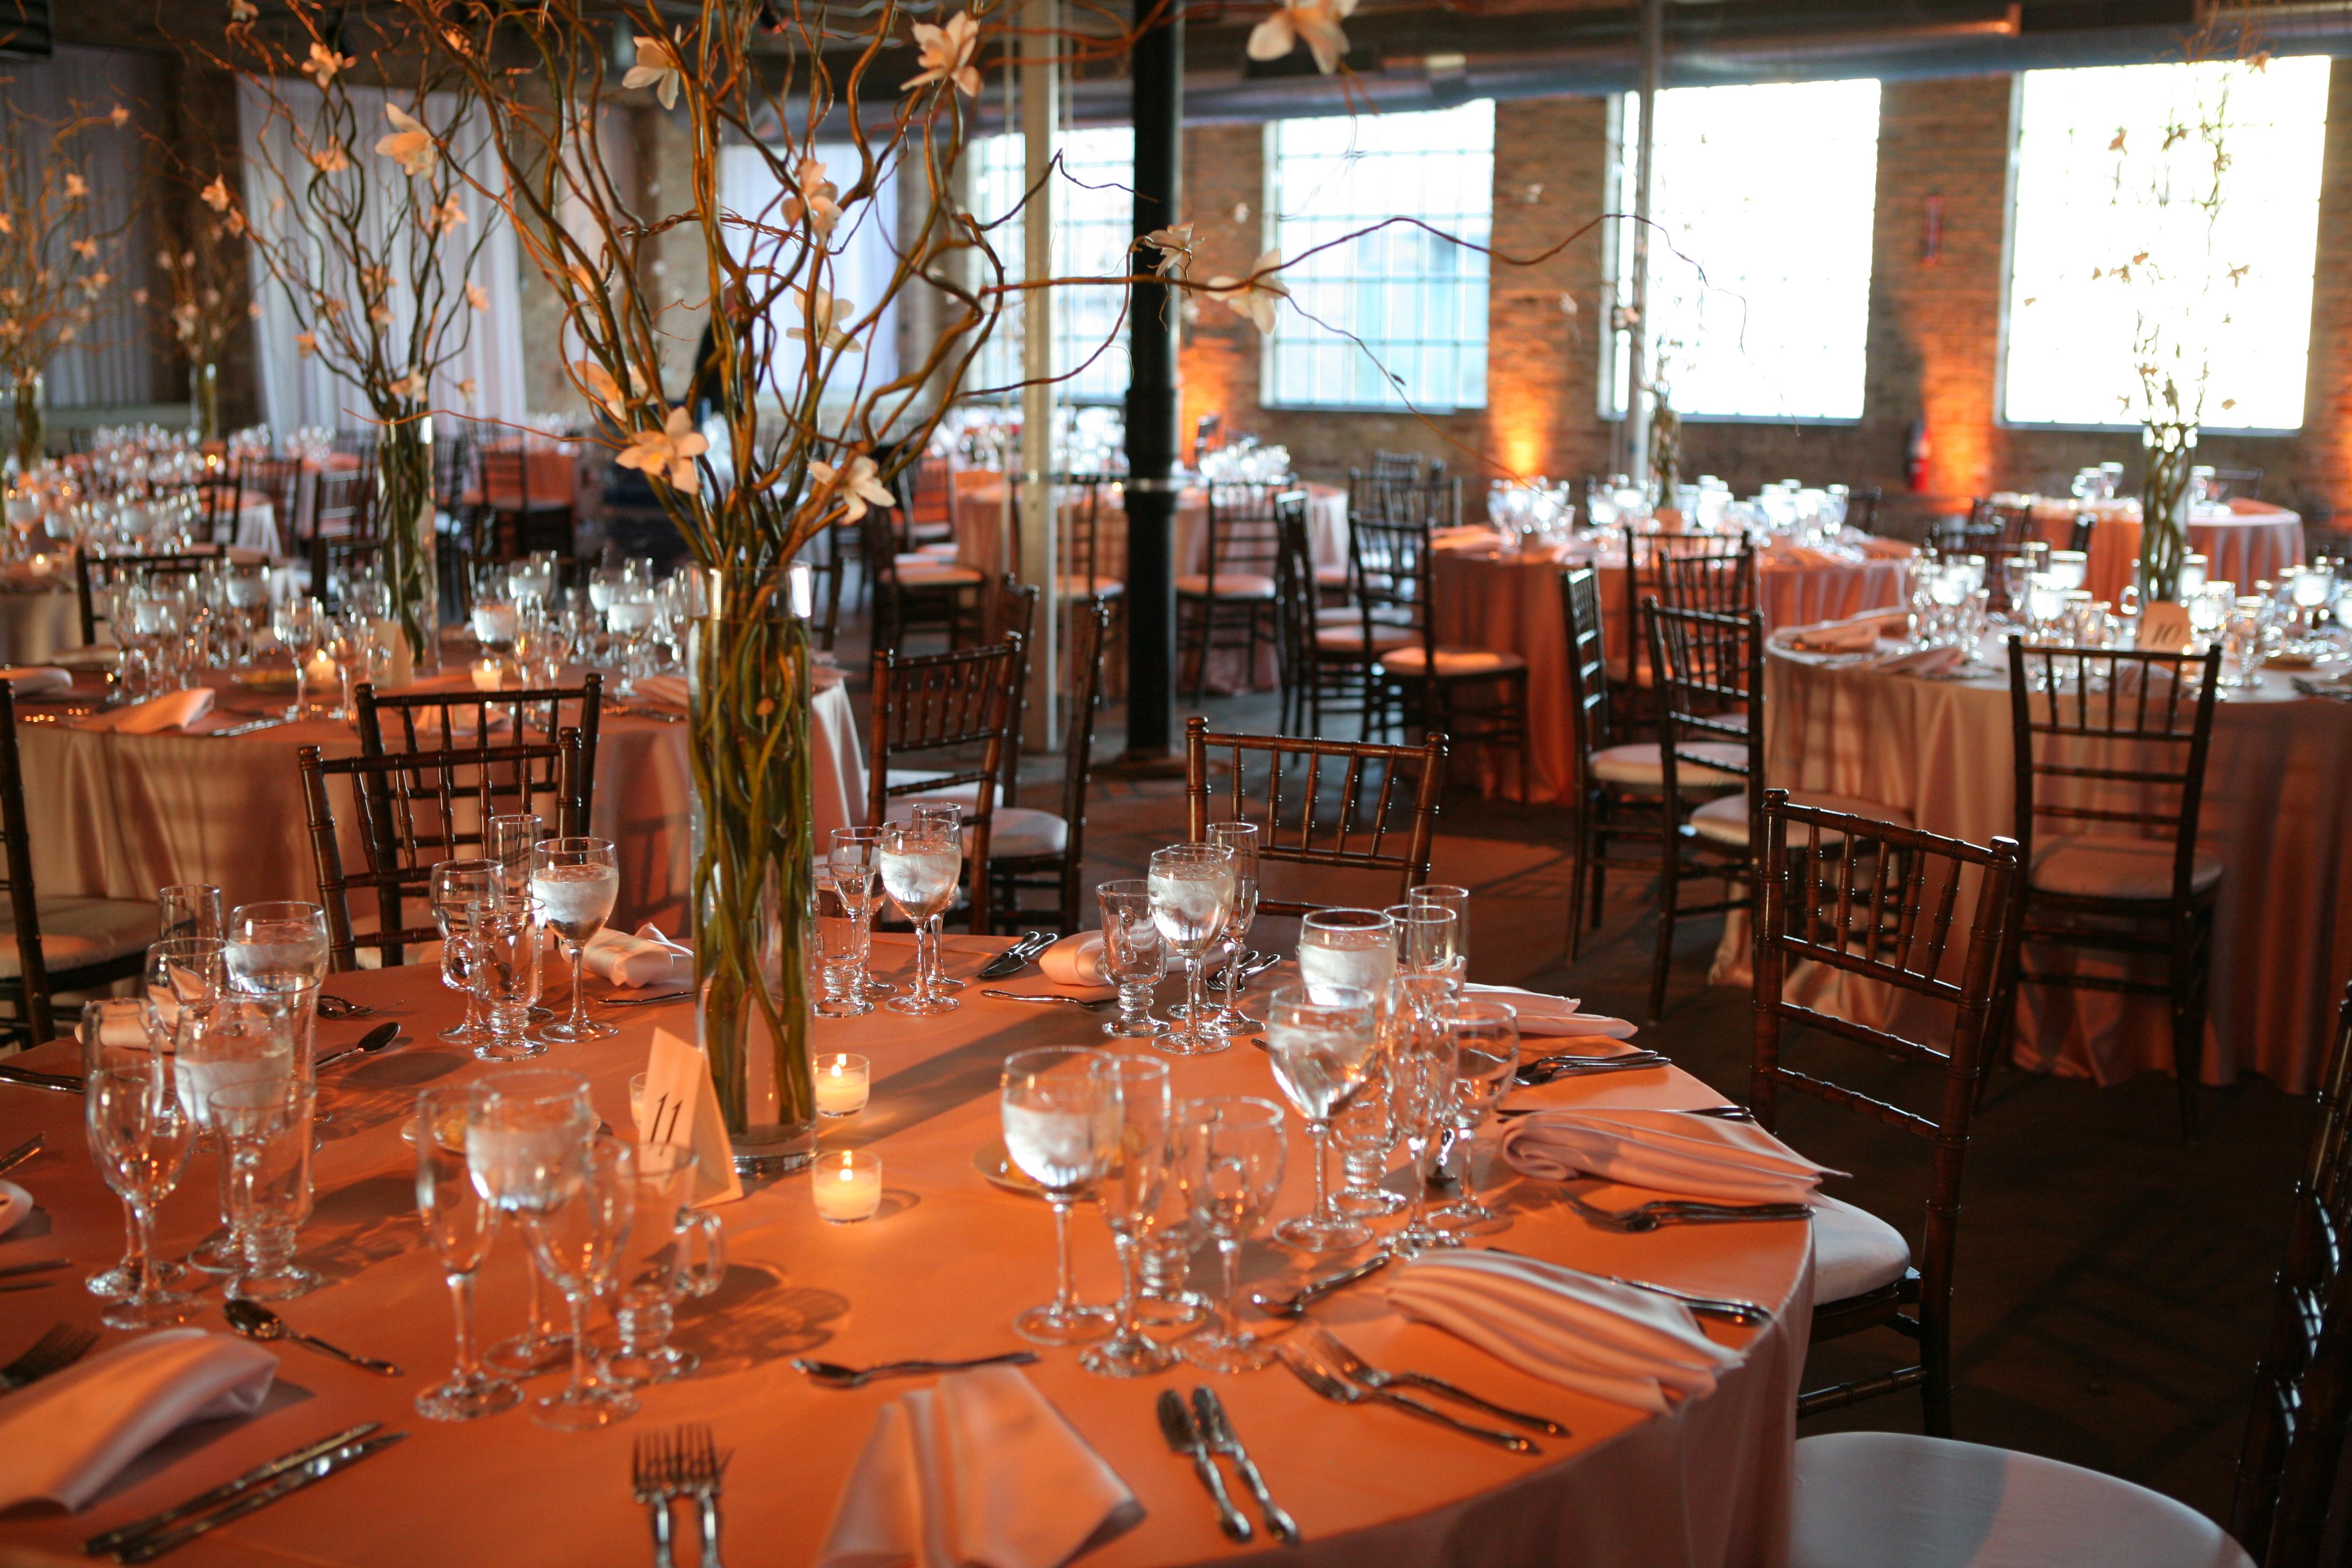 A brick-walled room with large warehouse windows is set for an event with many linen-covered roundtables. Each table is set for dinner lit with candles creating a warm glow and features an elaborate centerpiece of tall twisting vines and white flowers.